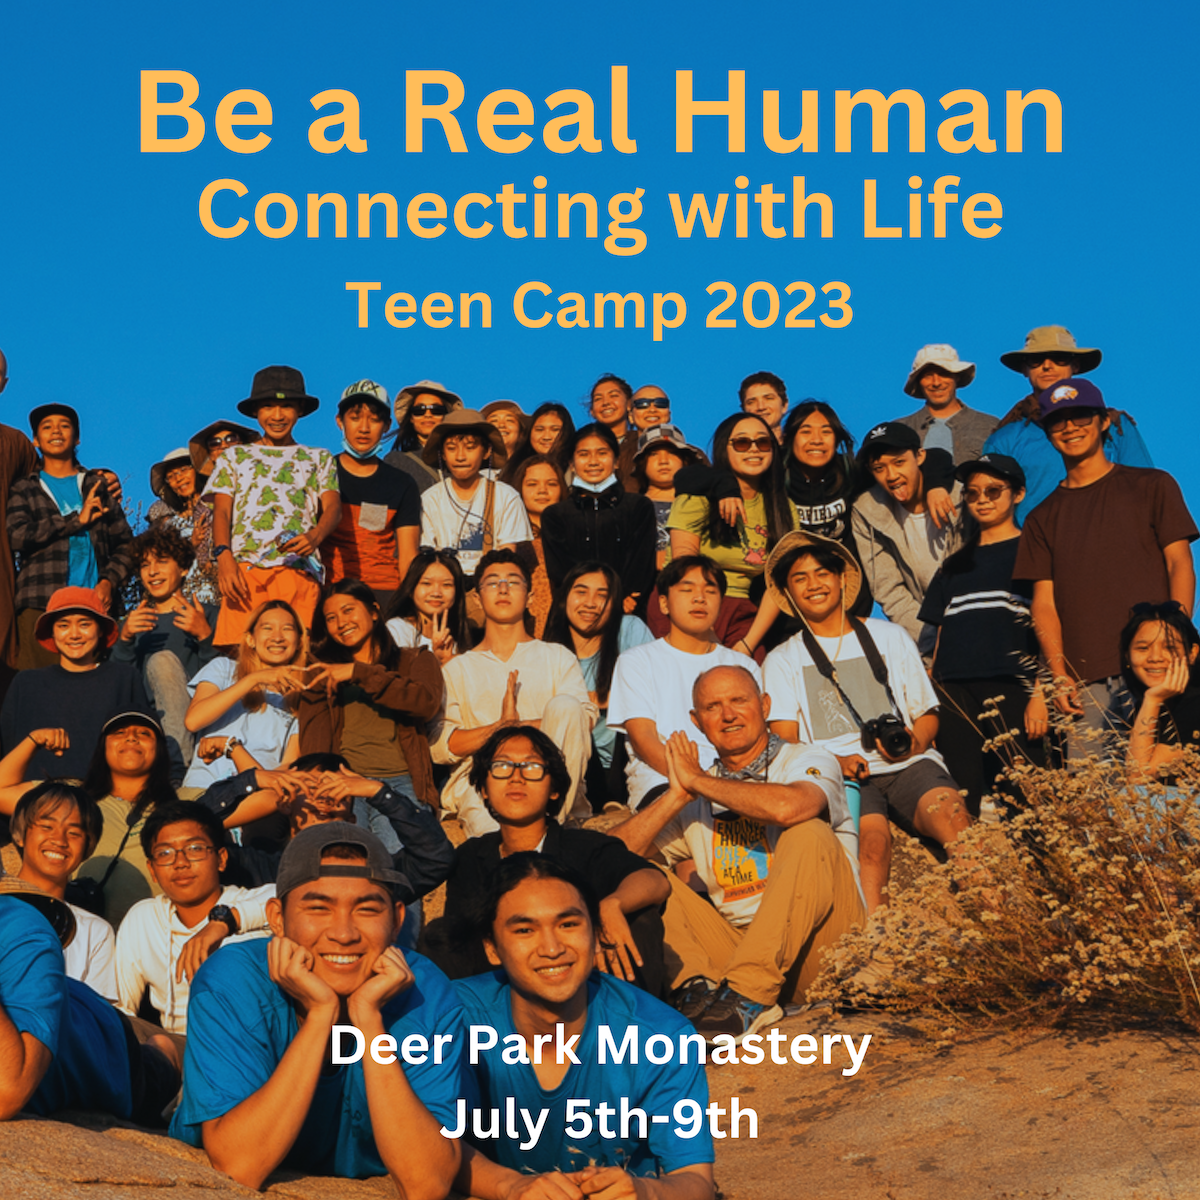 Be a Real Human. Connecting with Live. Teen Camp 2023. Deer Park Monastery July 5-9